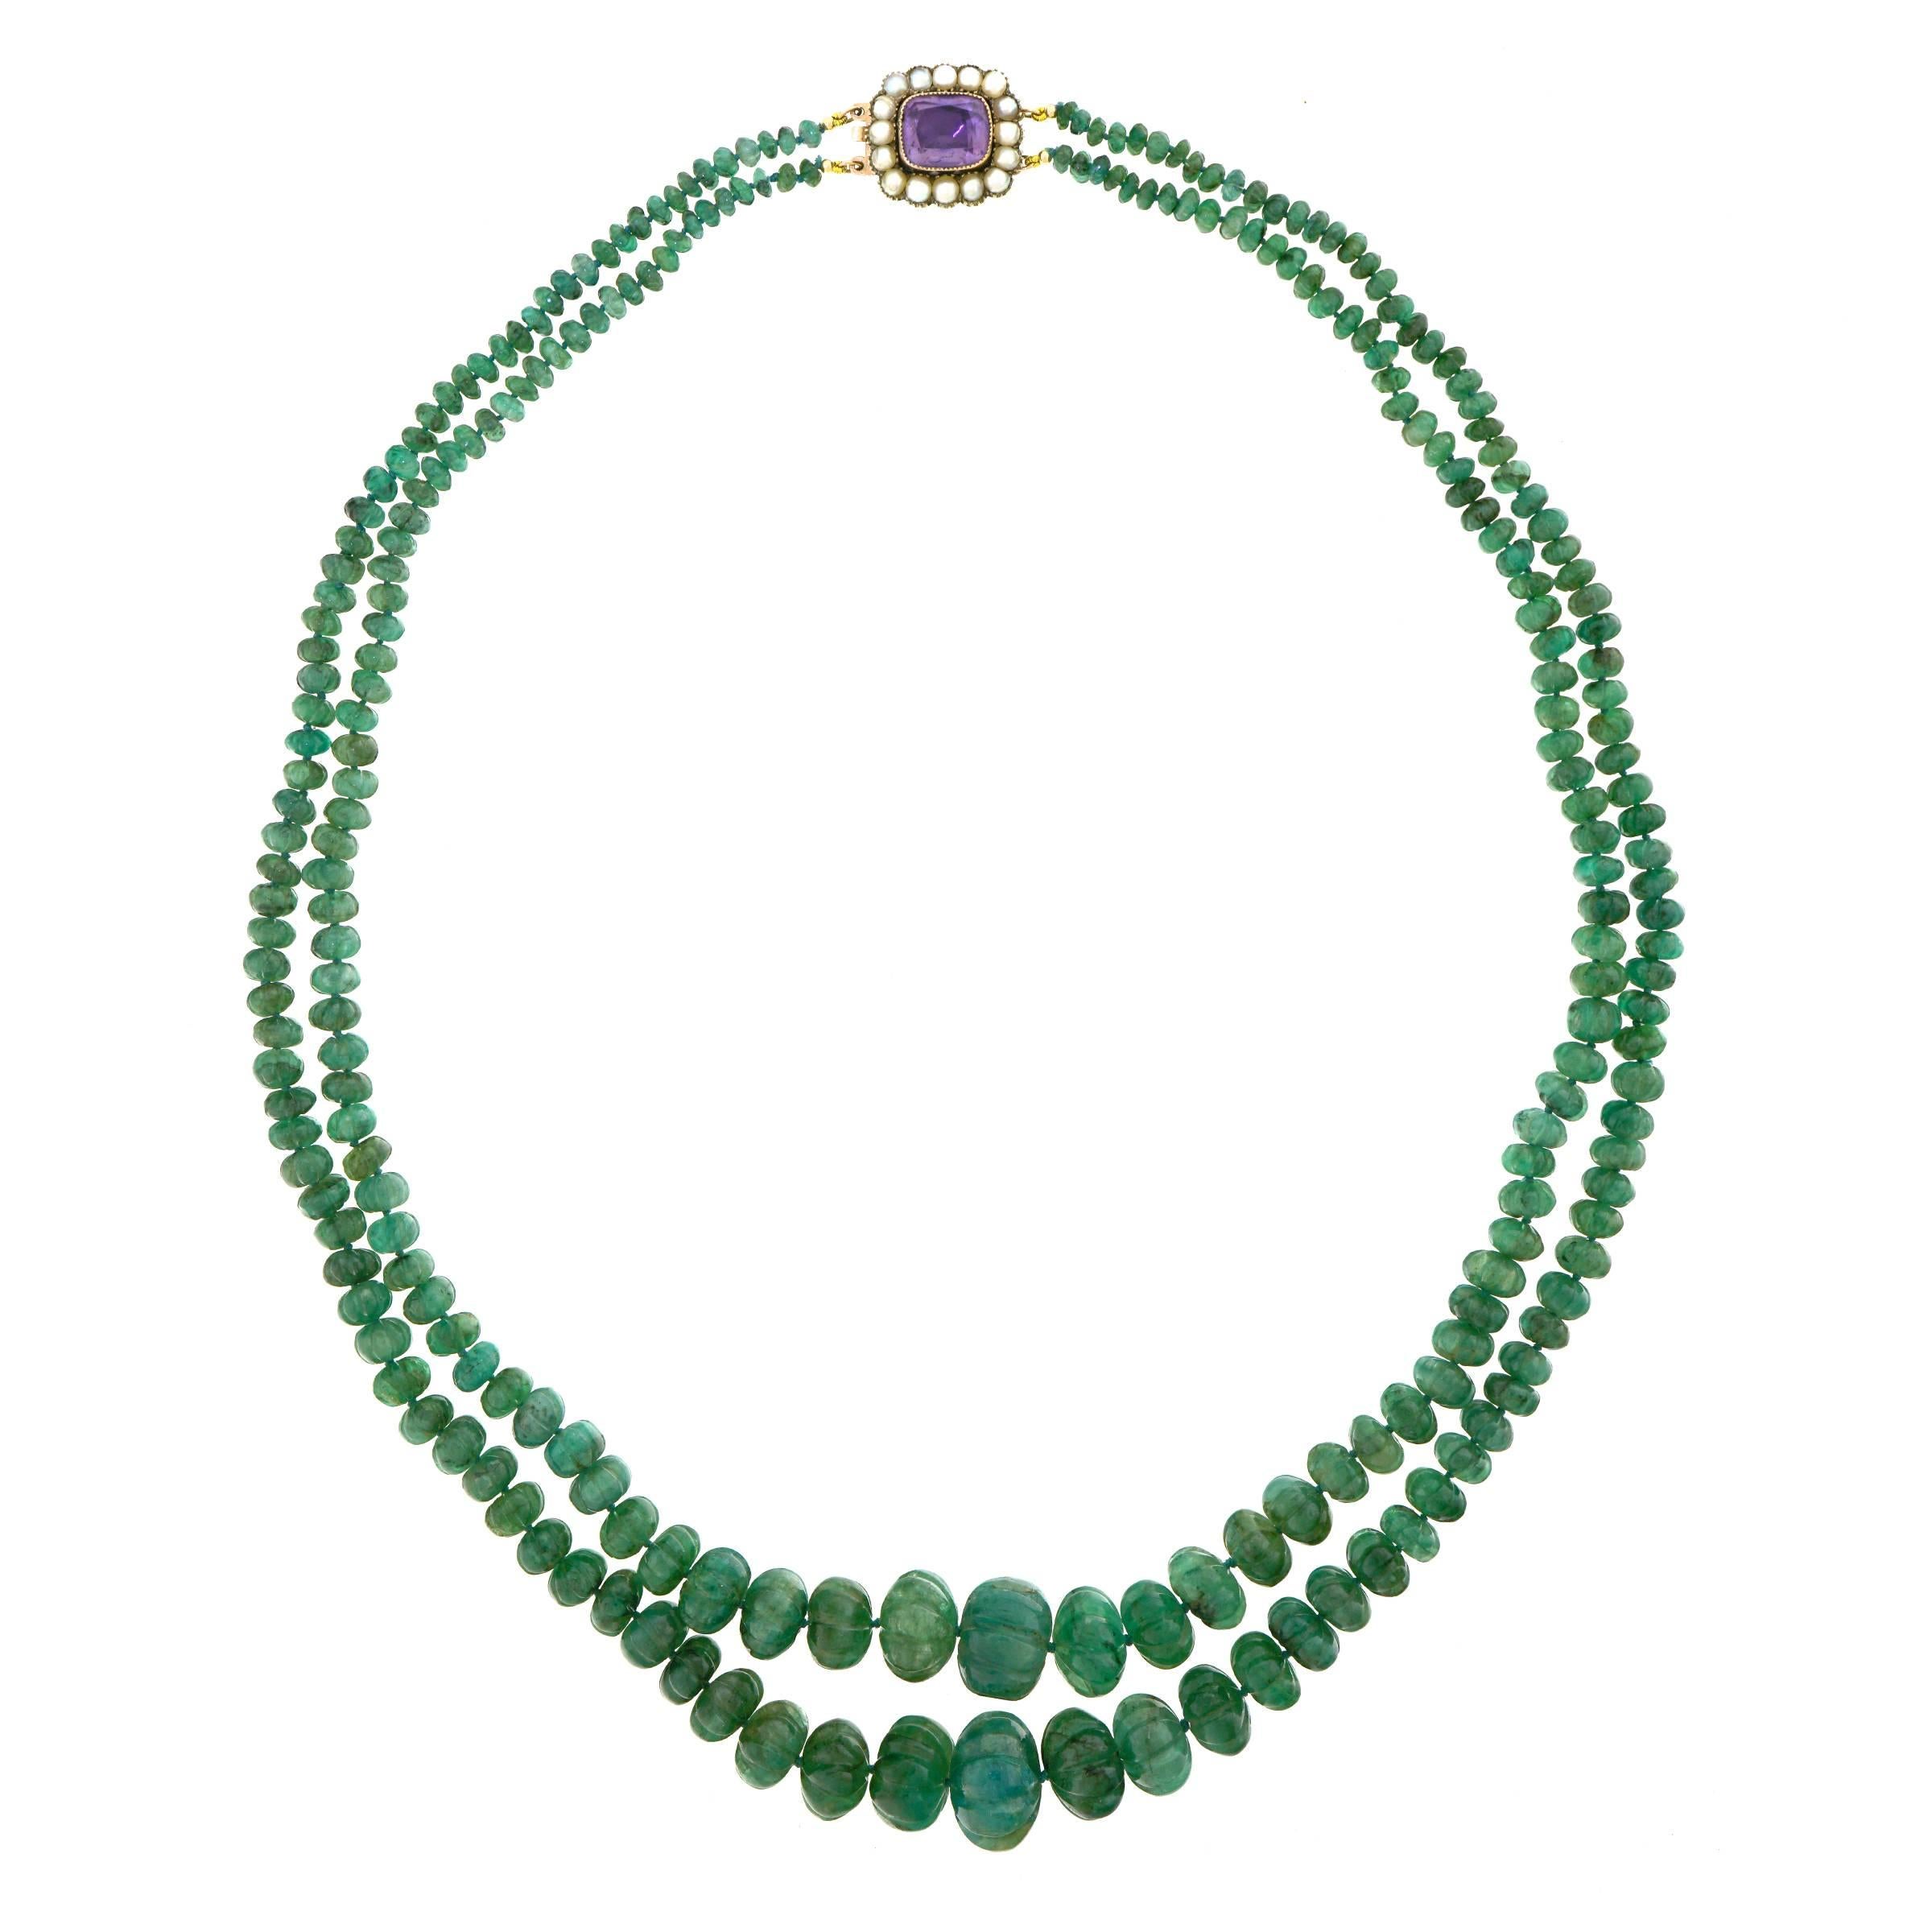 Double-Strand Emerald Necklace with Antique Gold Catch